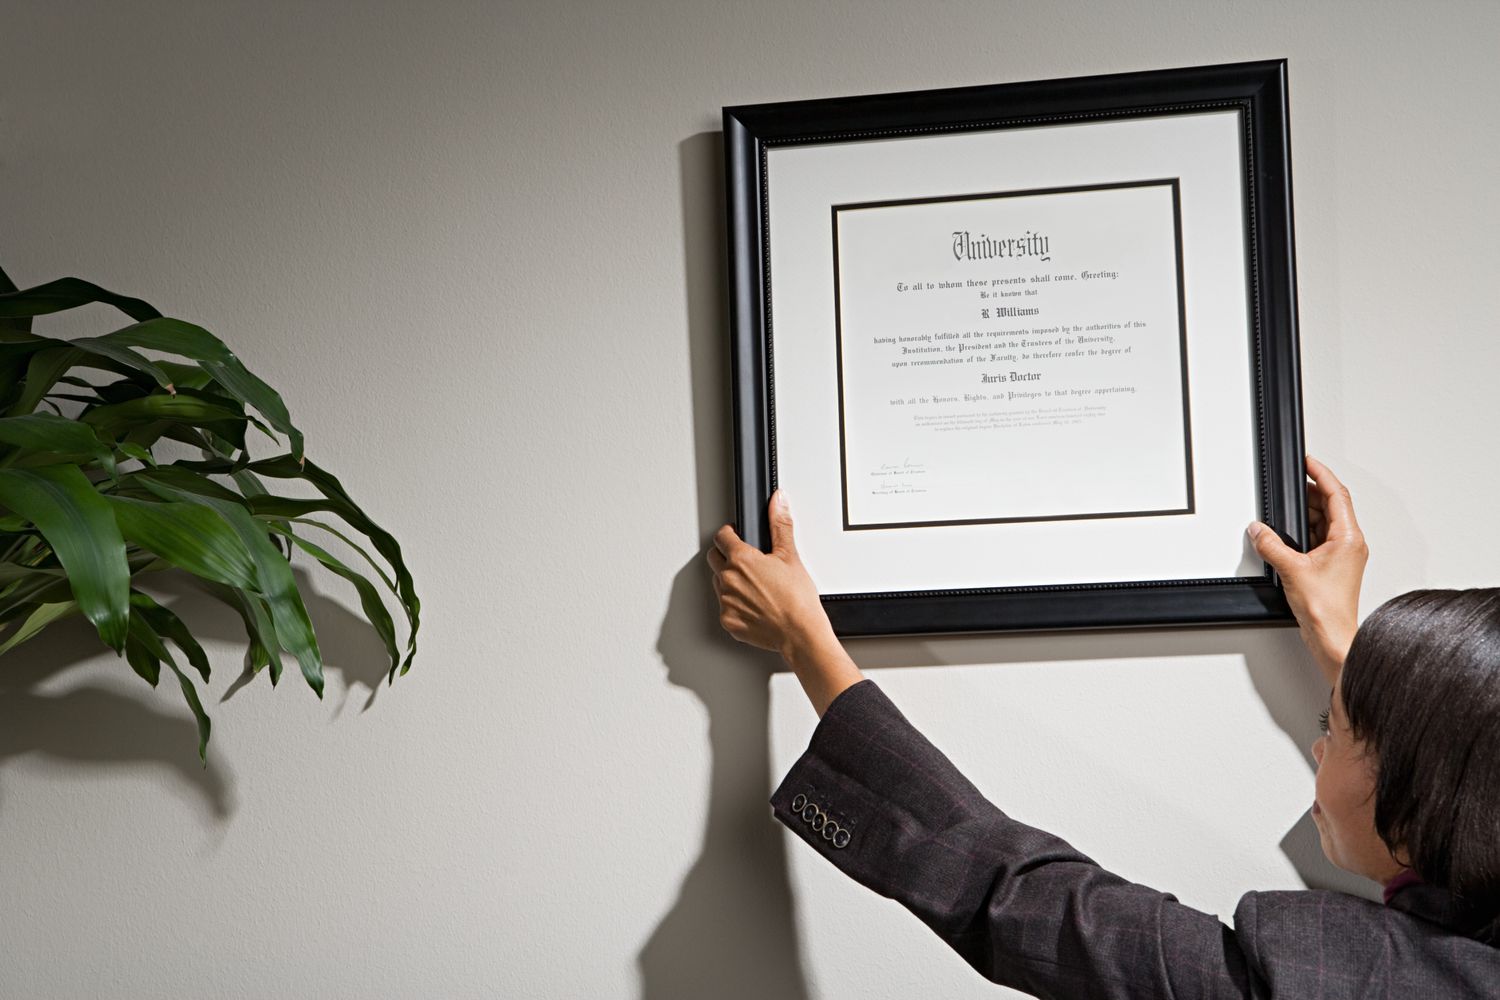 Financial advisor hanging credentials on the wall.